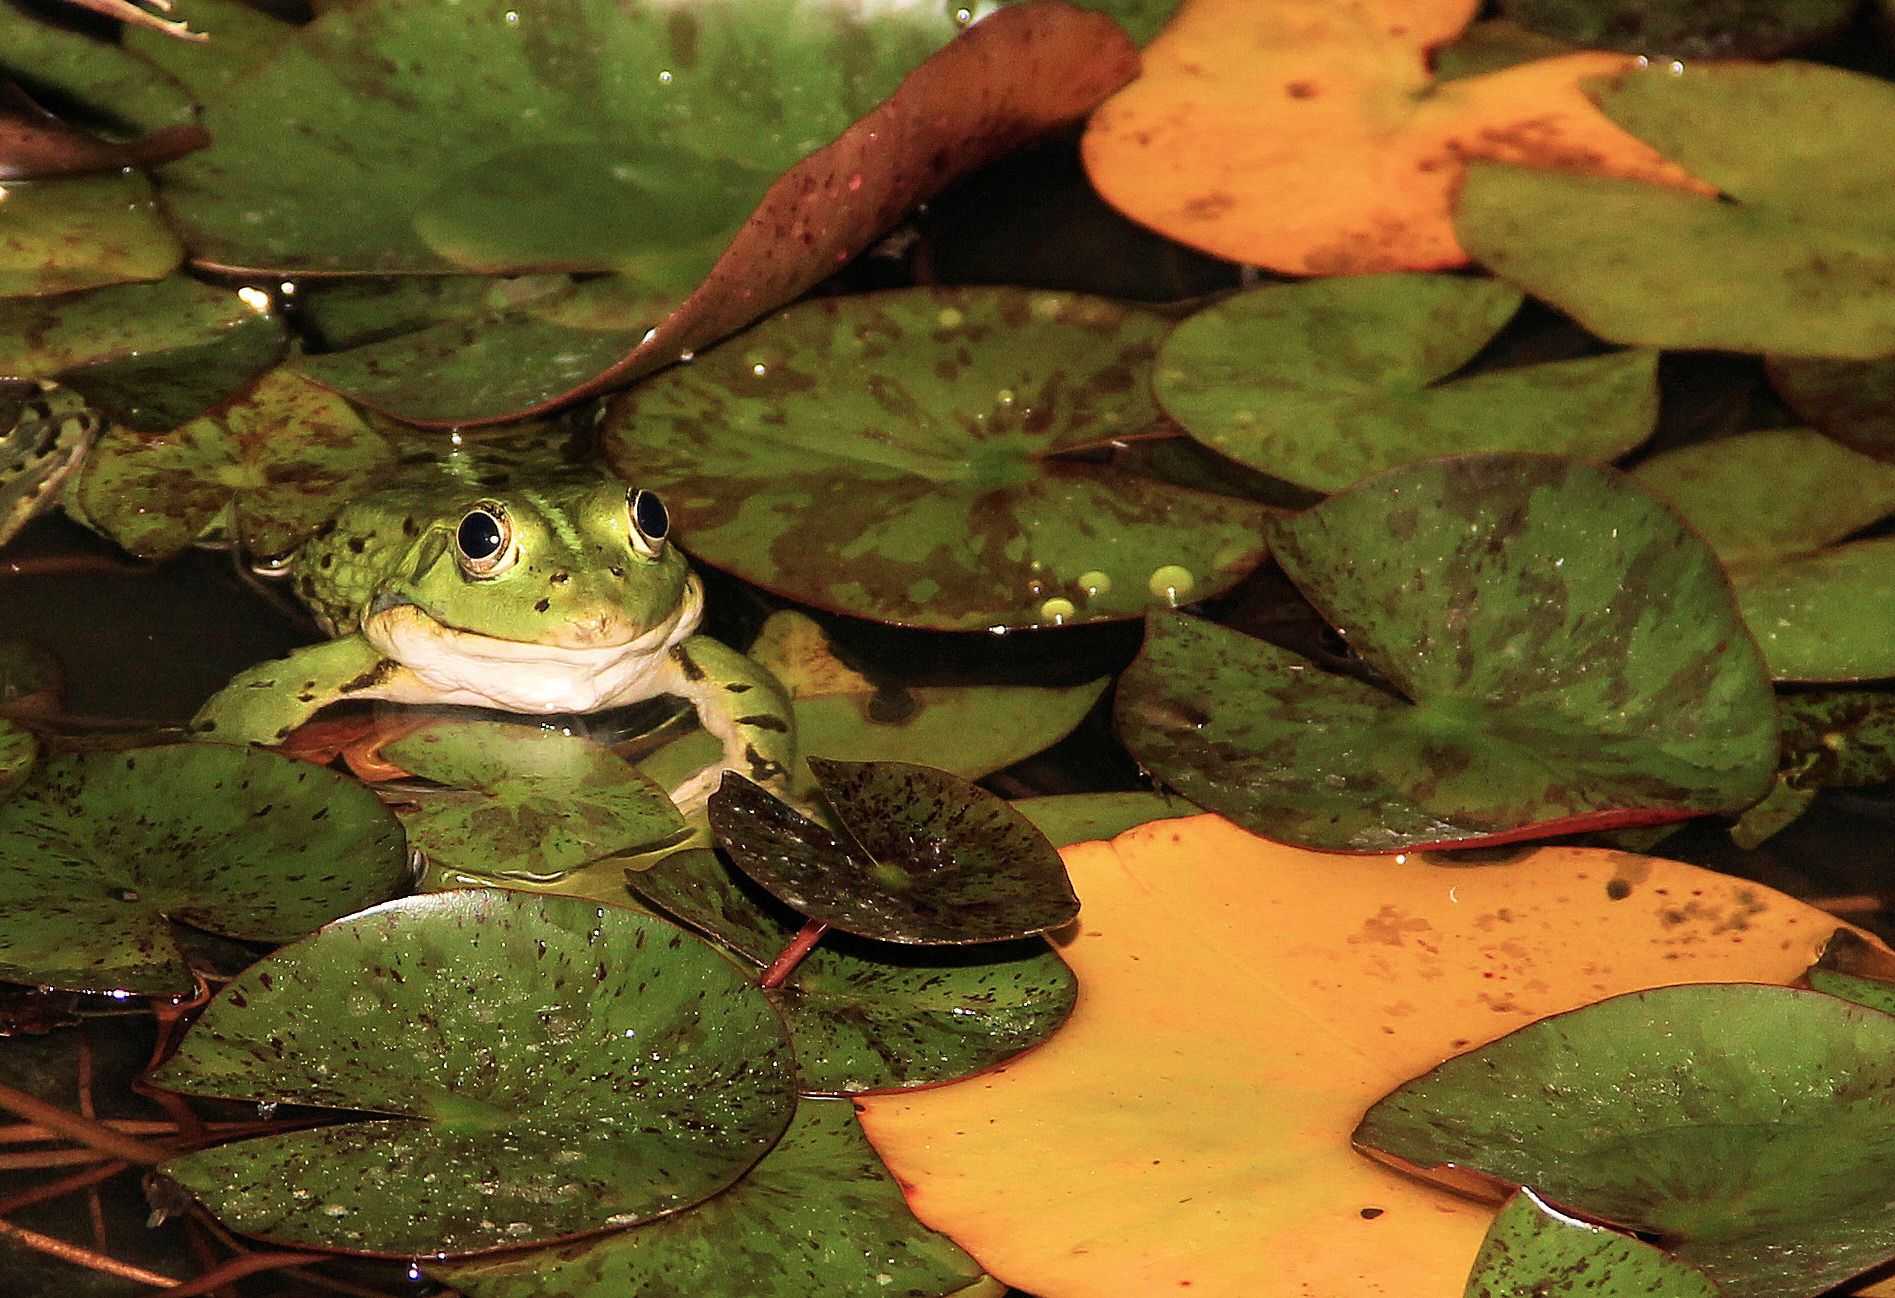 Frog on water lily...